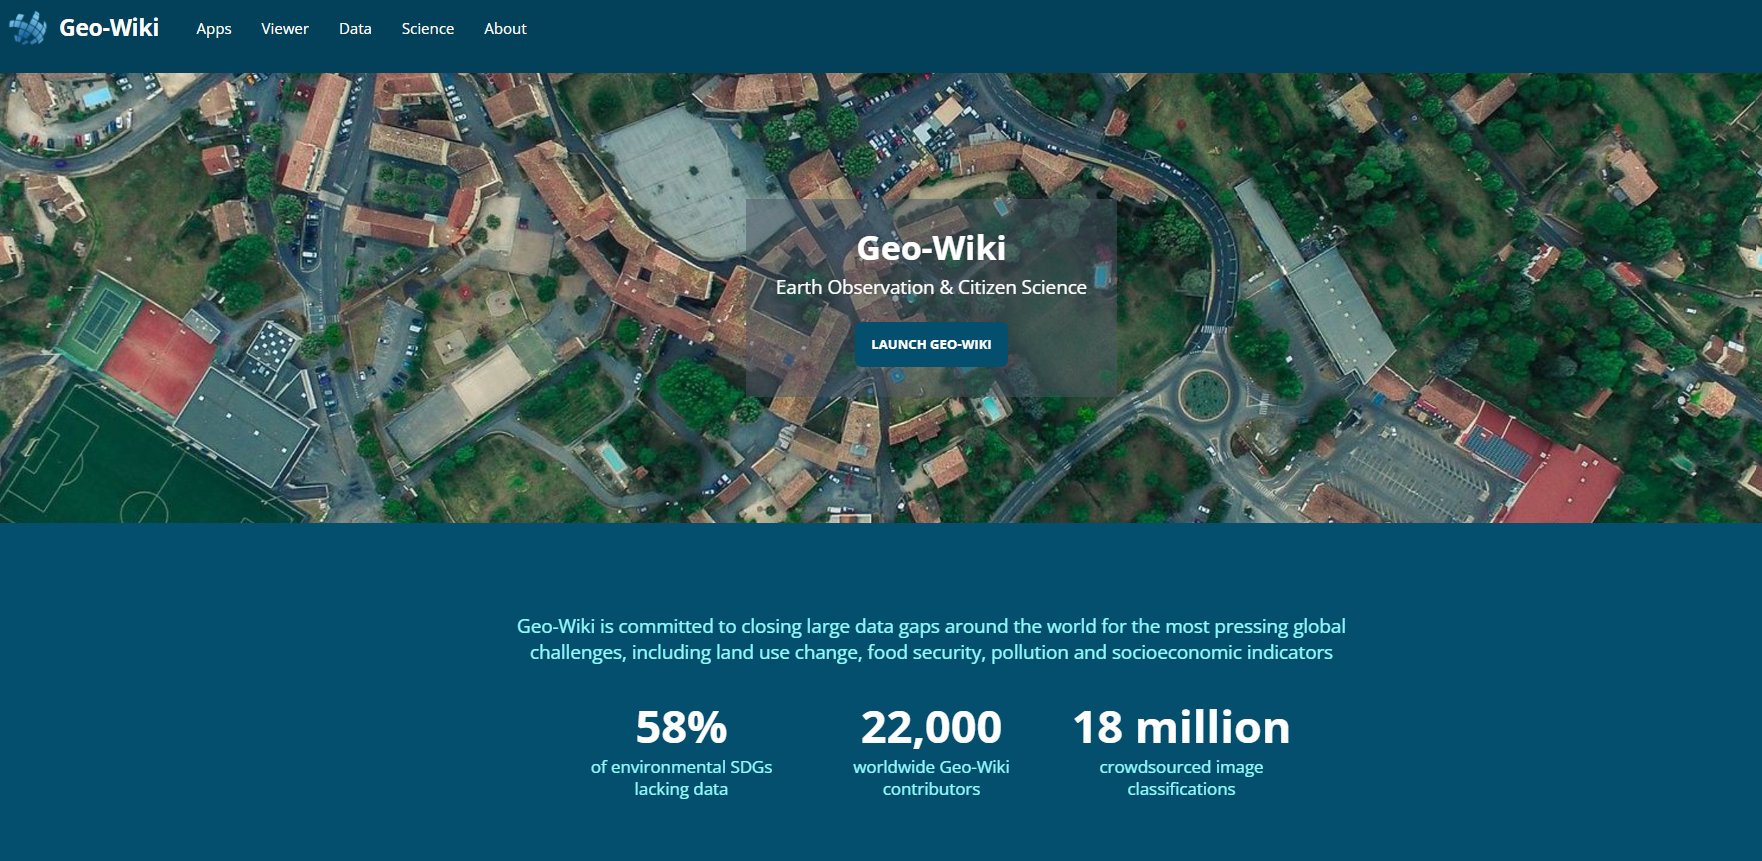 GeoWiki - A new Geo-Wiki #crowdsourcing campaign coming this April